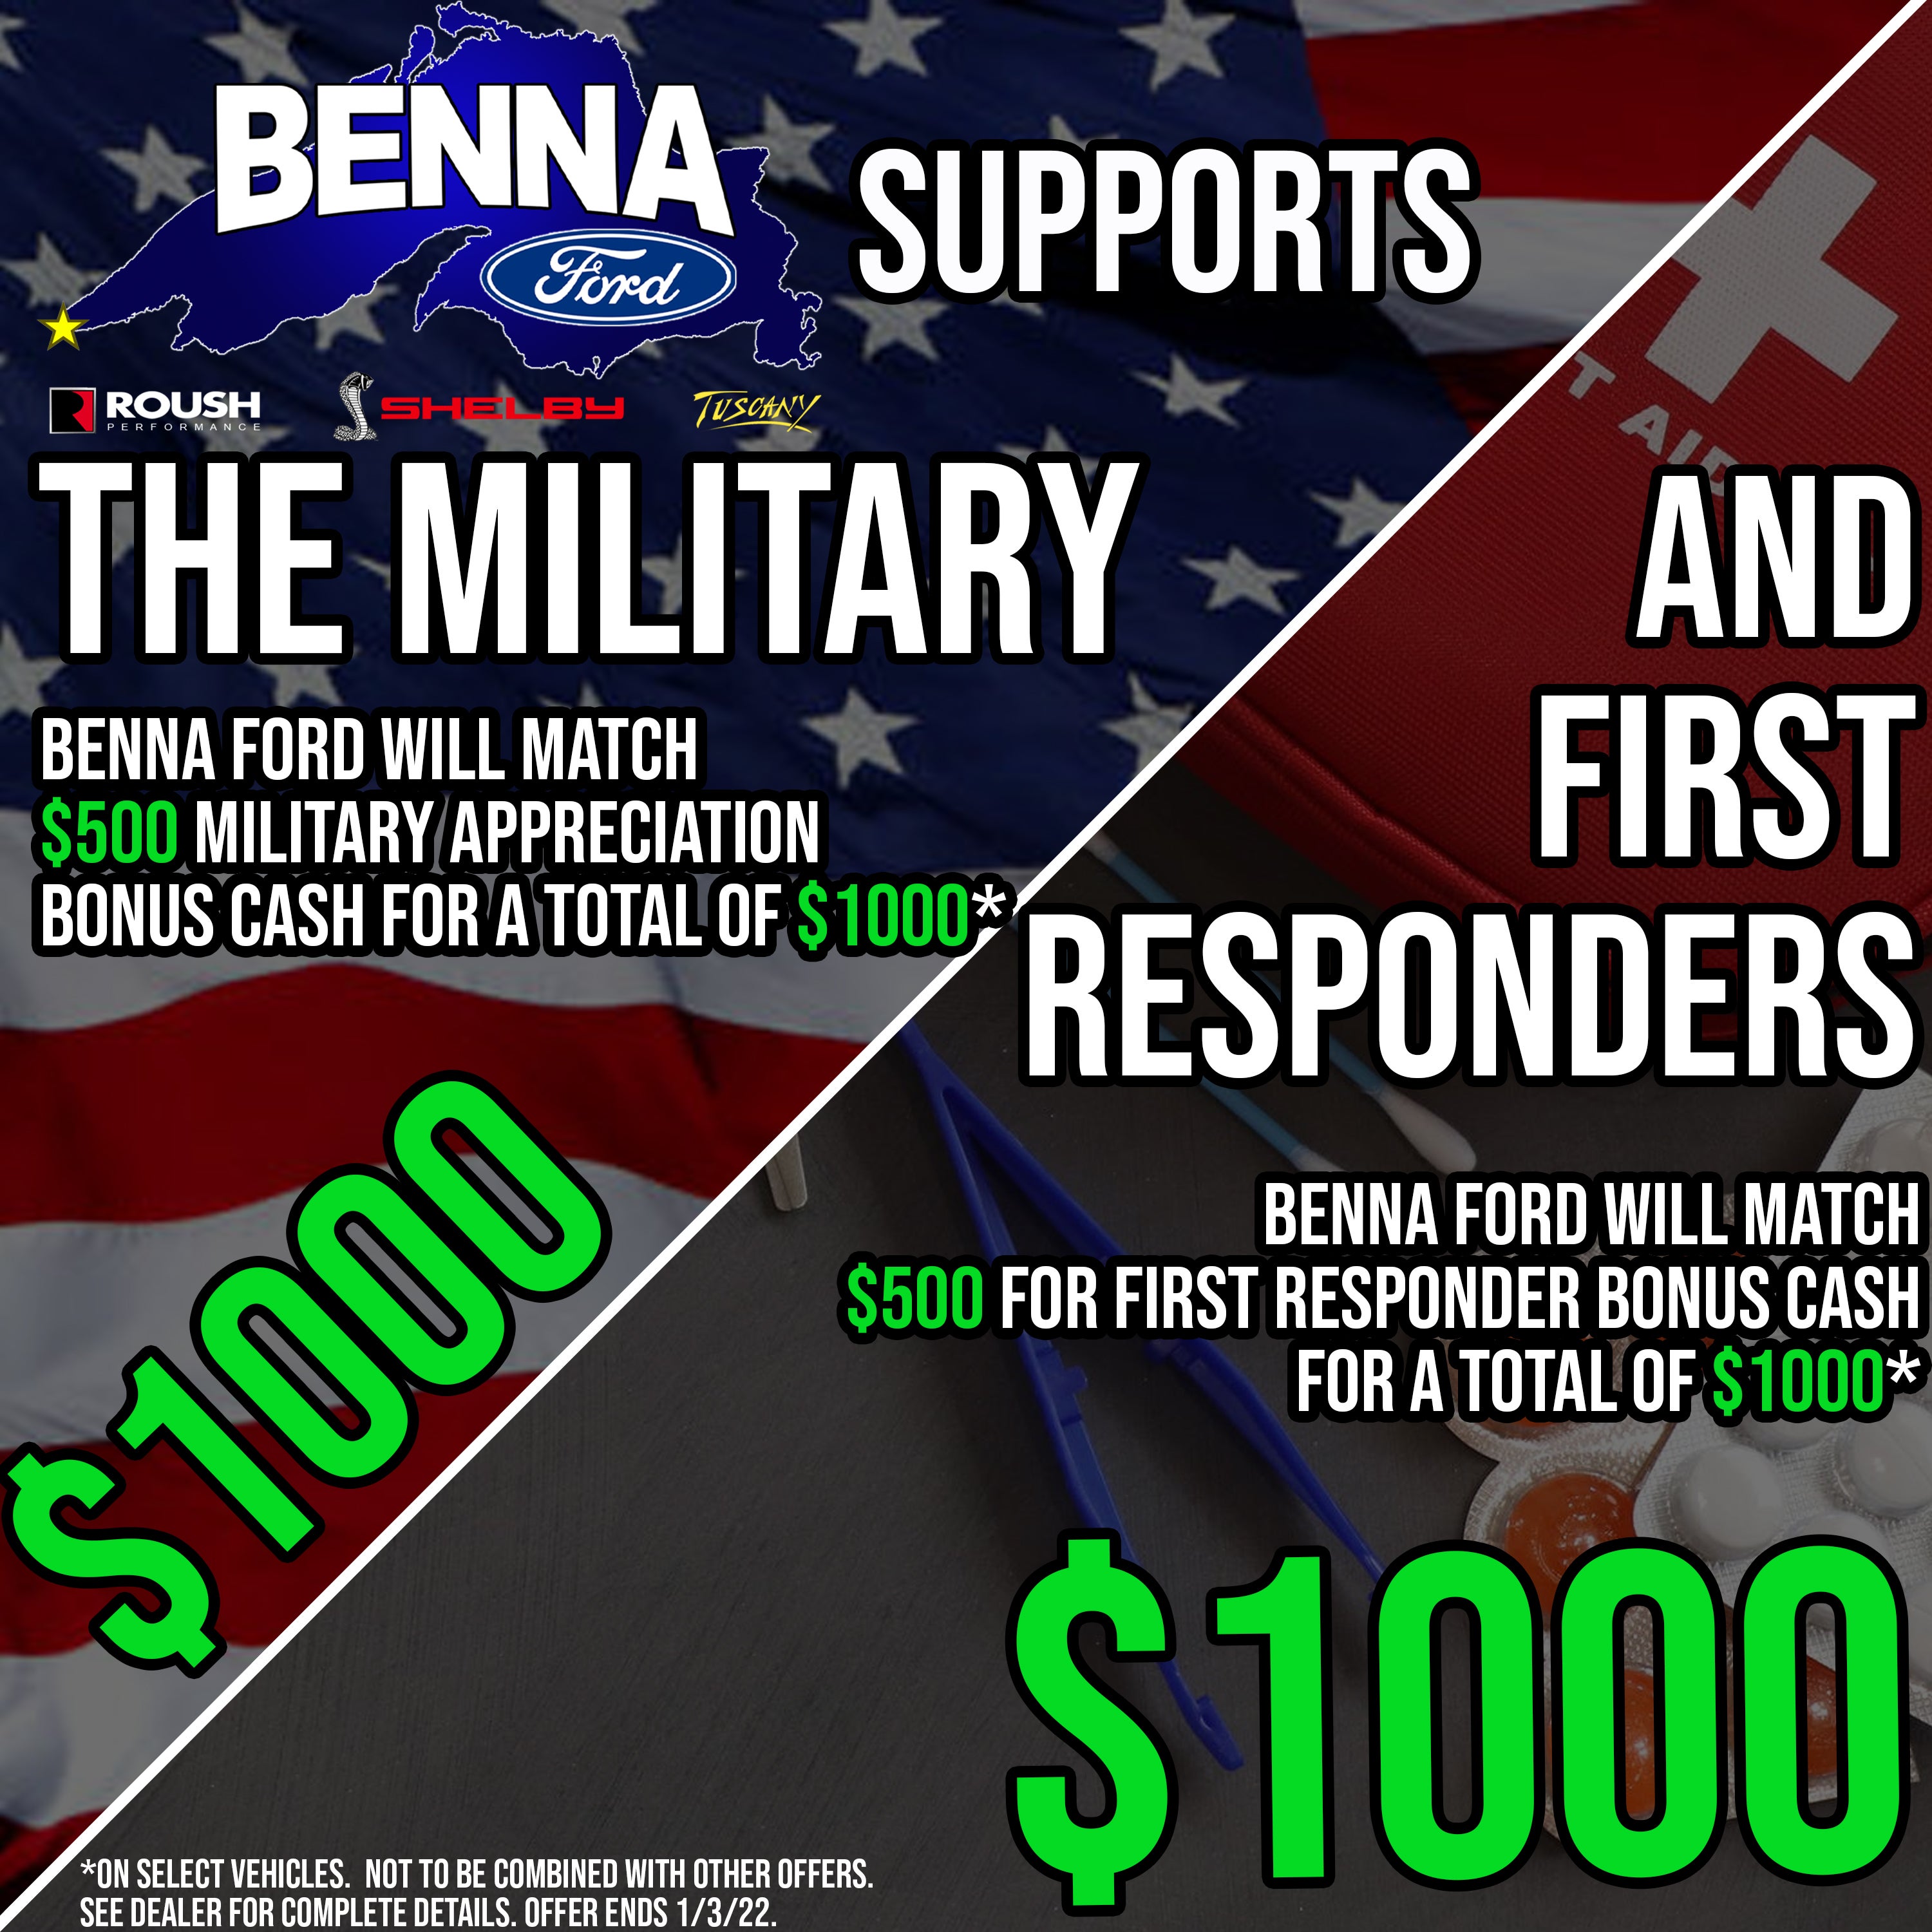 Benna Supports the Military and First Responders